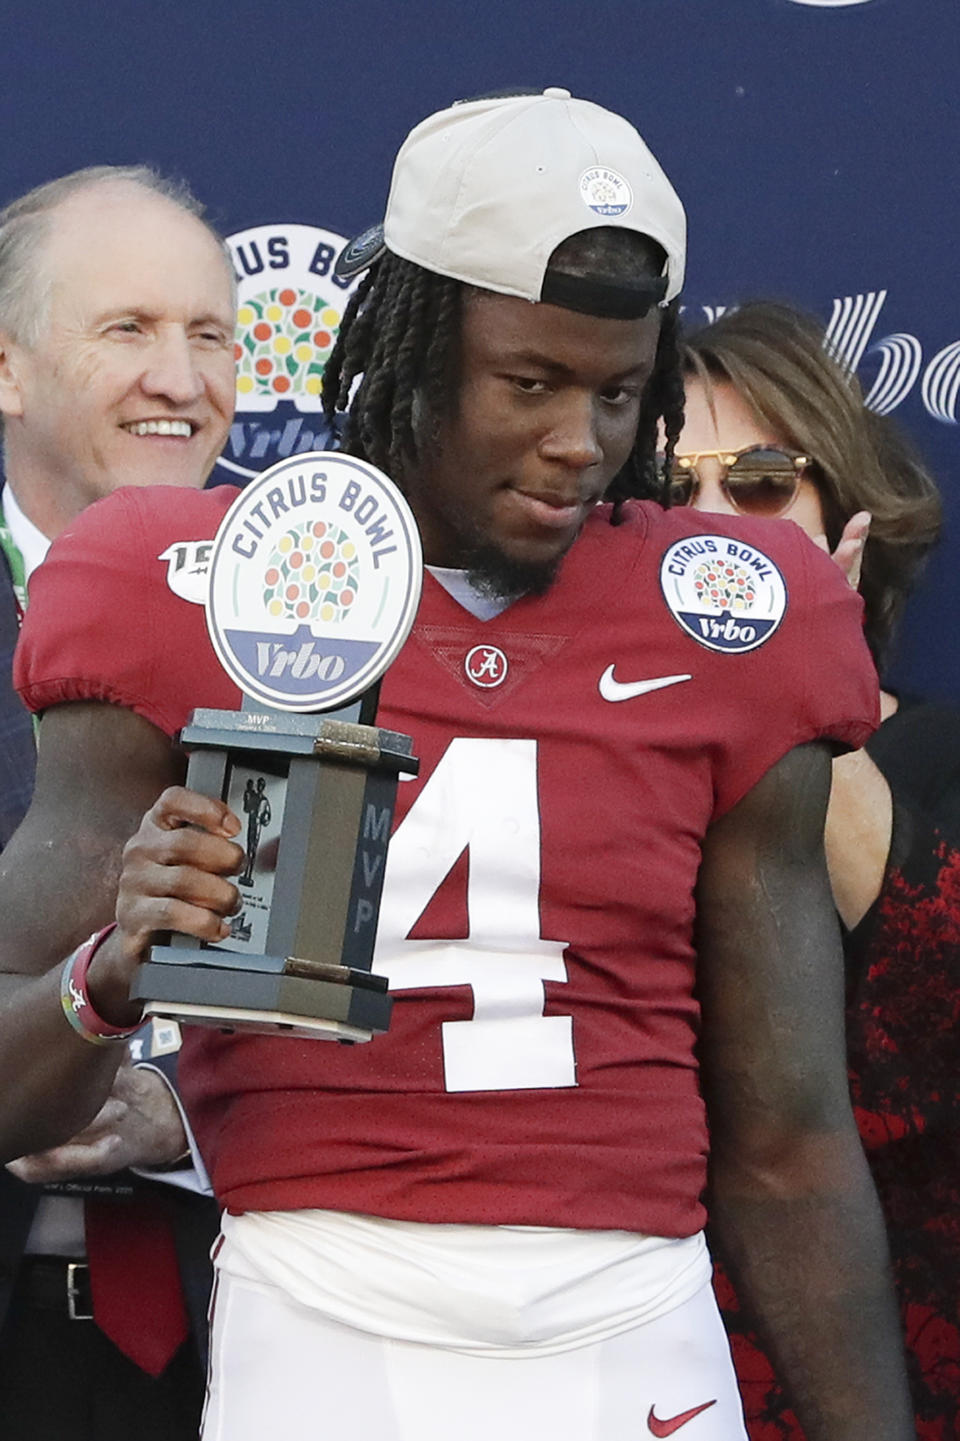 Alabama wide receiver Jerry Jeudy holds up the trophy after he was named MVP of the Citrus Bowl after defeating Michigan in an NCAA college football game, Wednesday, Jan. 1, 2020, in Orlando, Fla. (AP Photo/John Raoux)